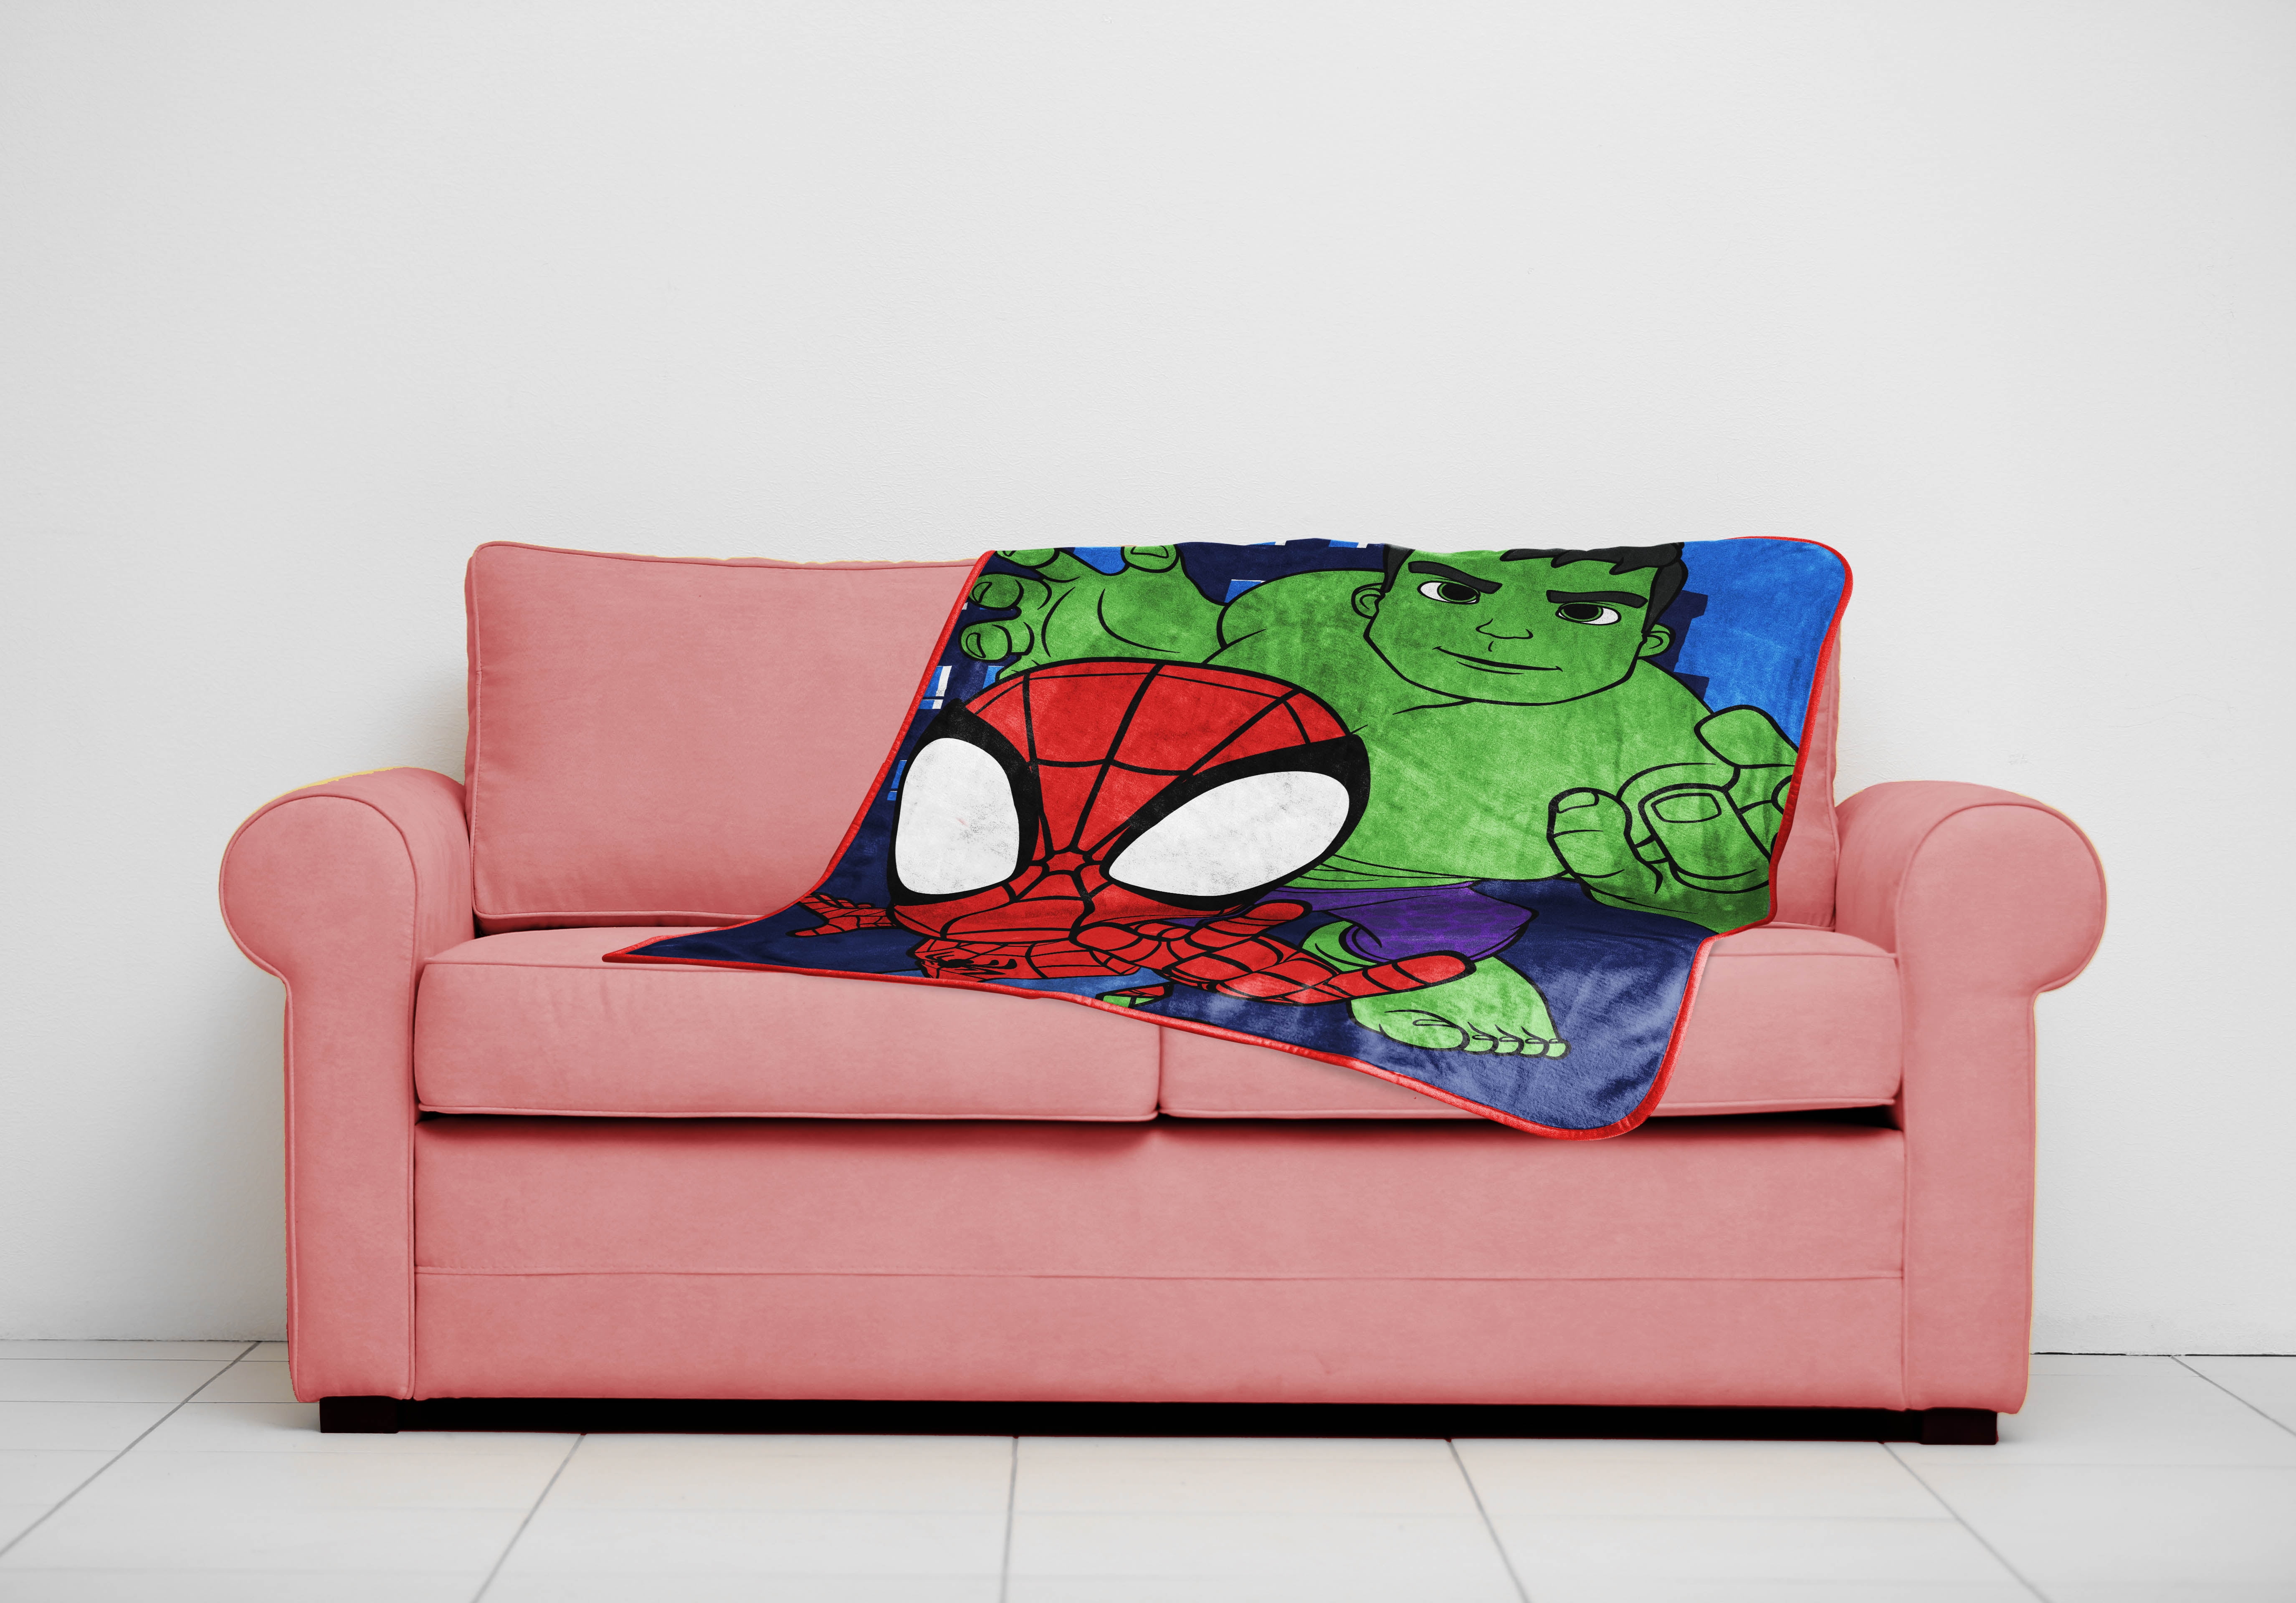 Spidey and his Amazing Friends Oversized Rugs, 54x78